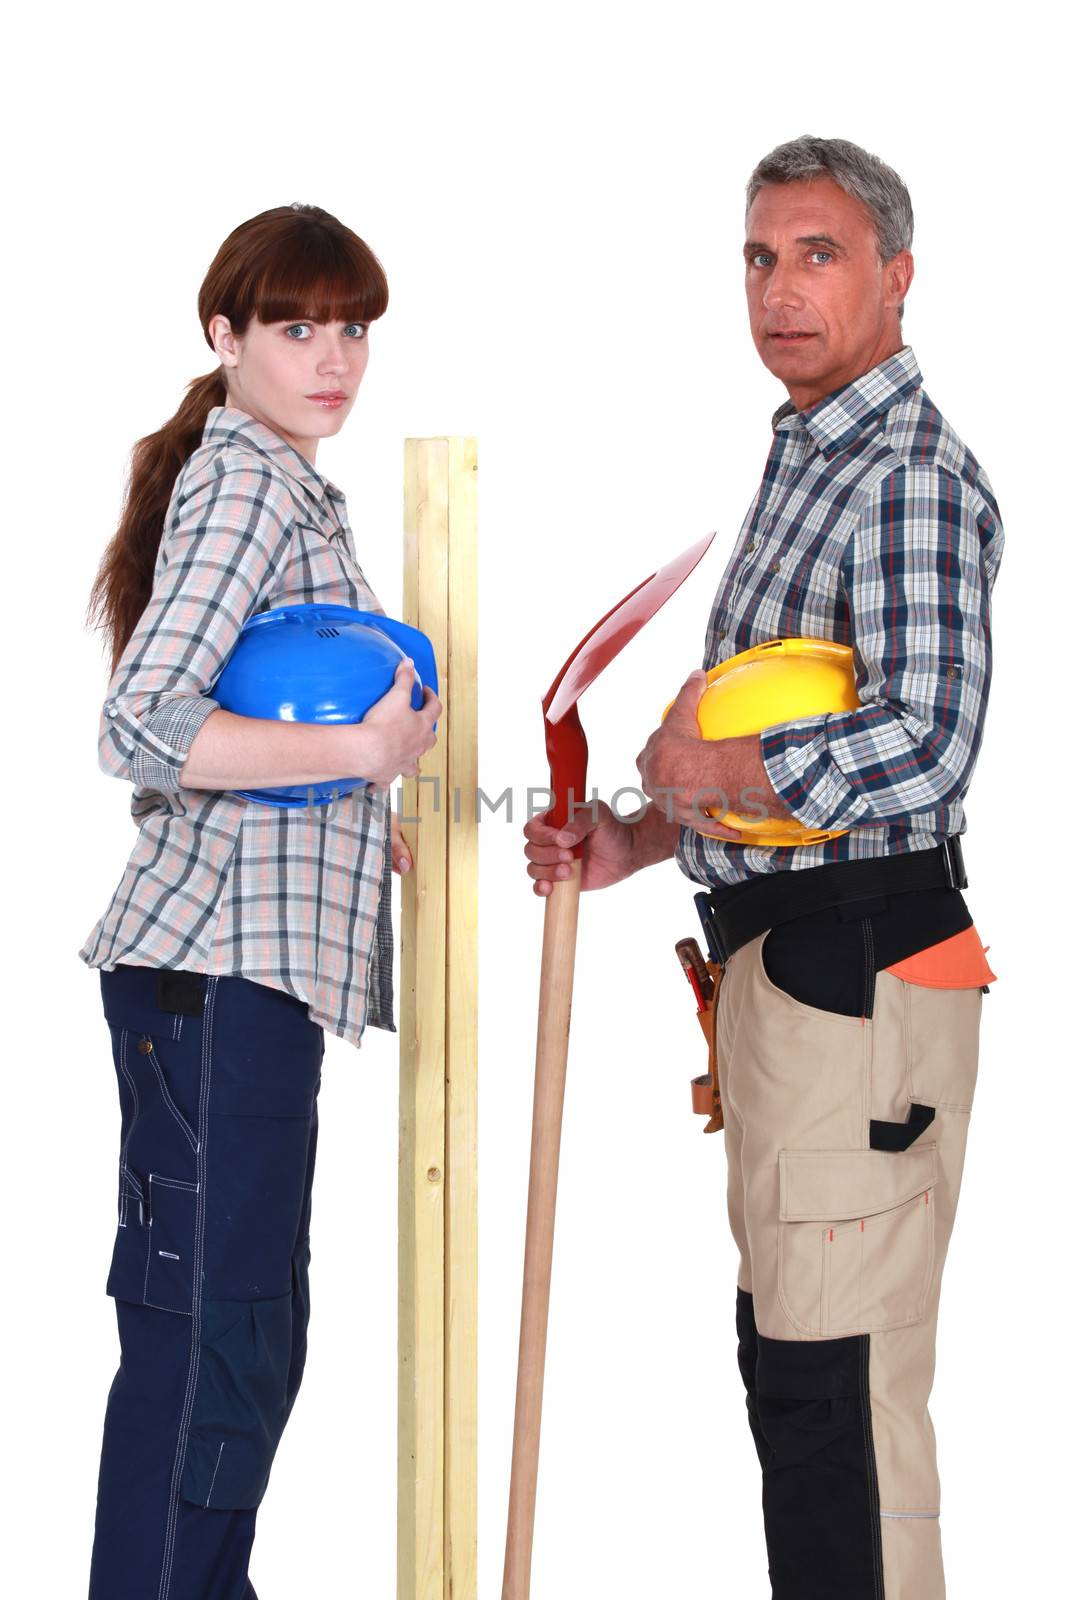 Bricklayer and carpenter